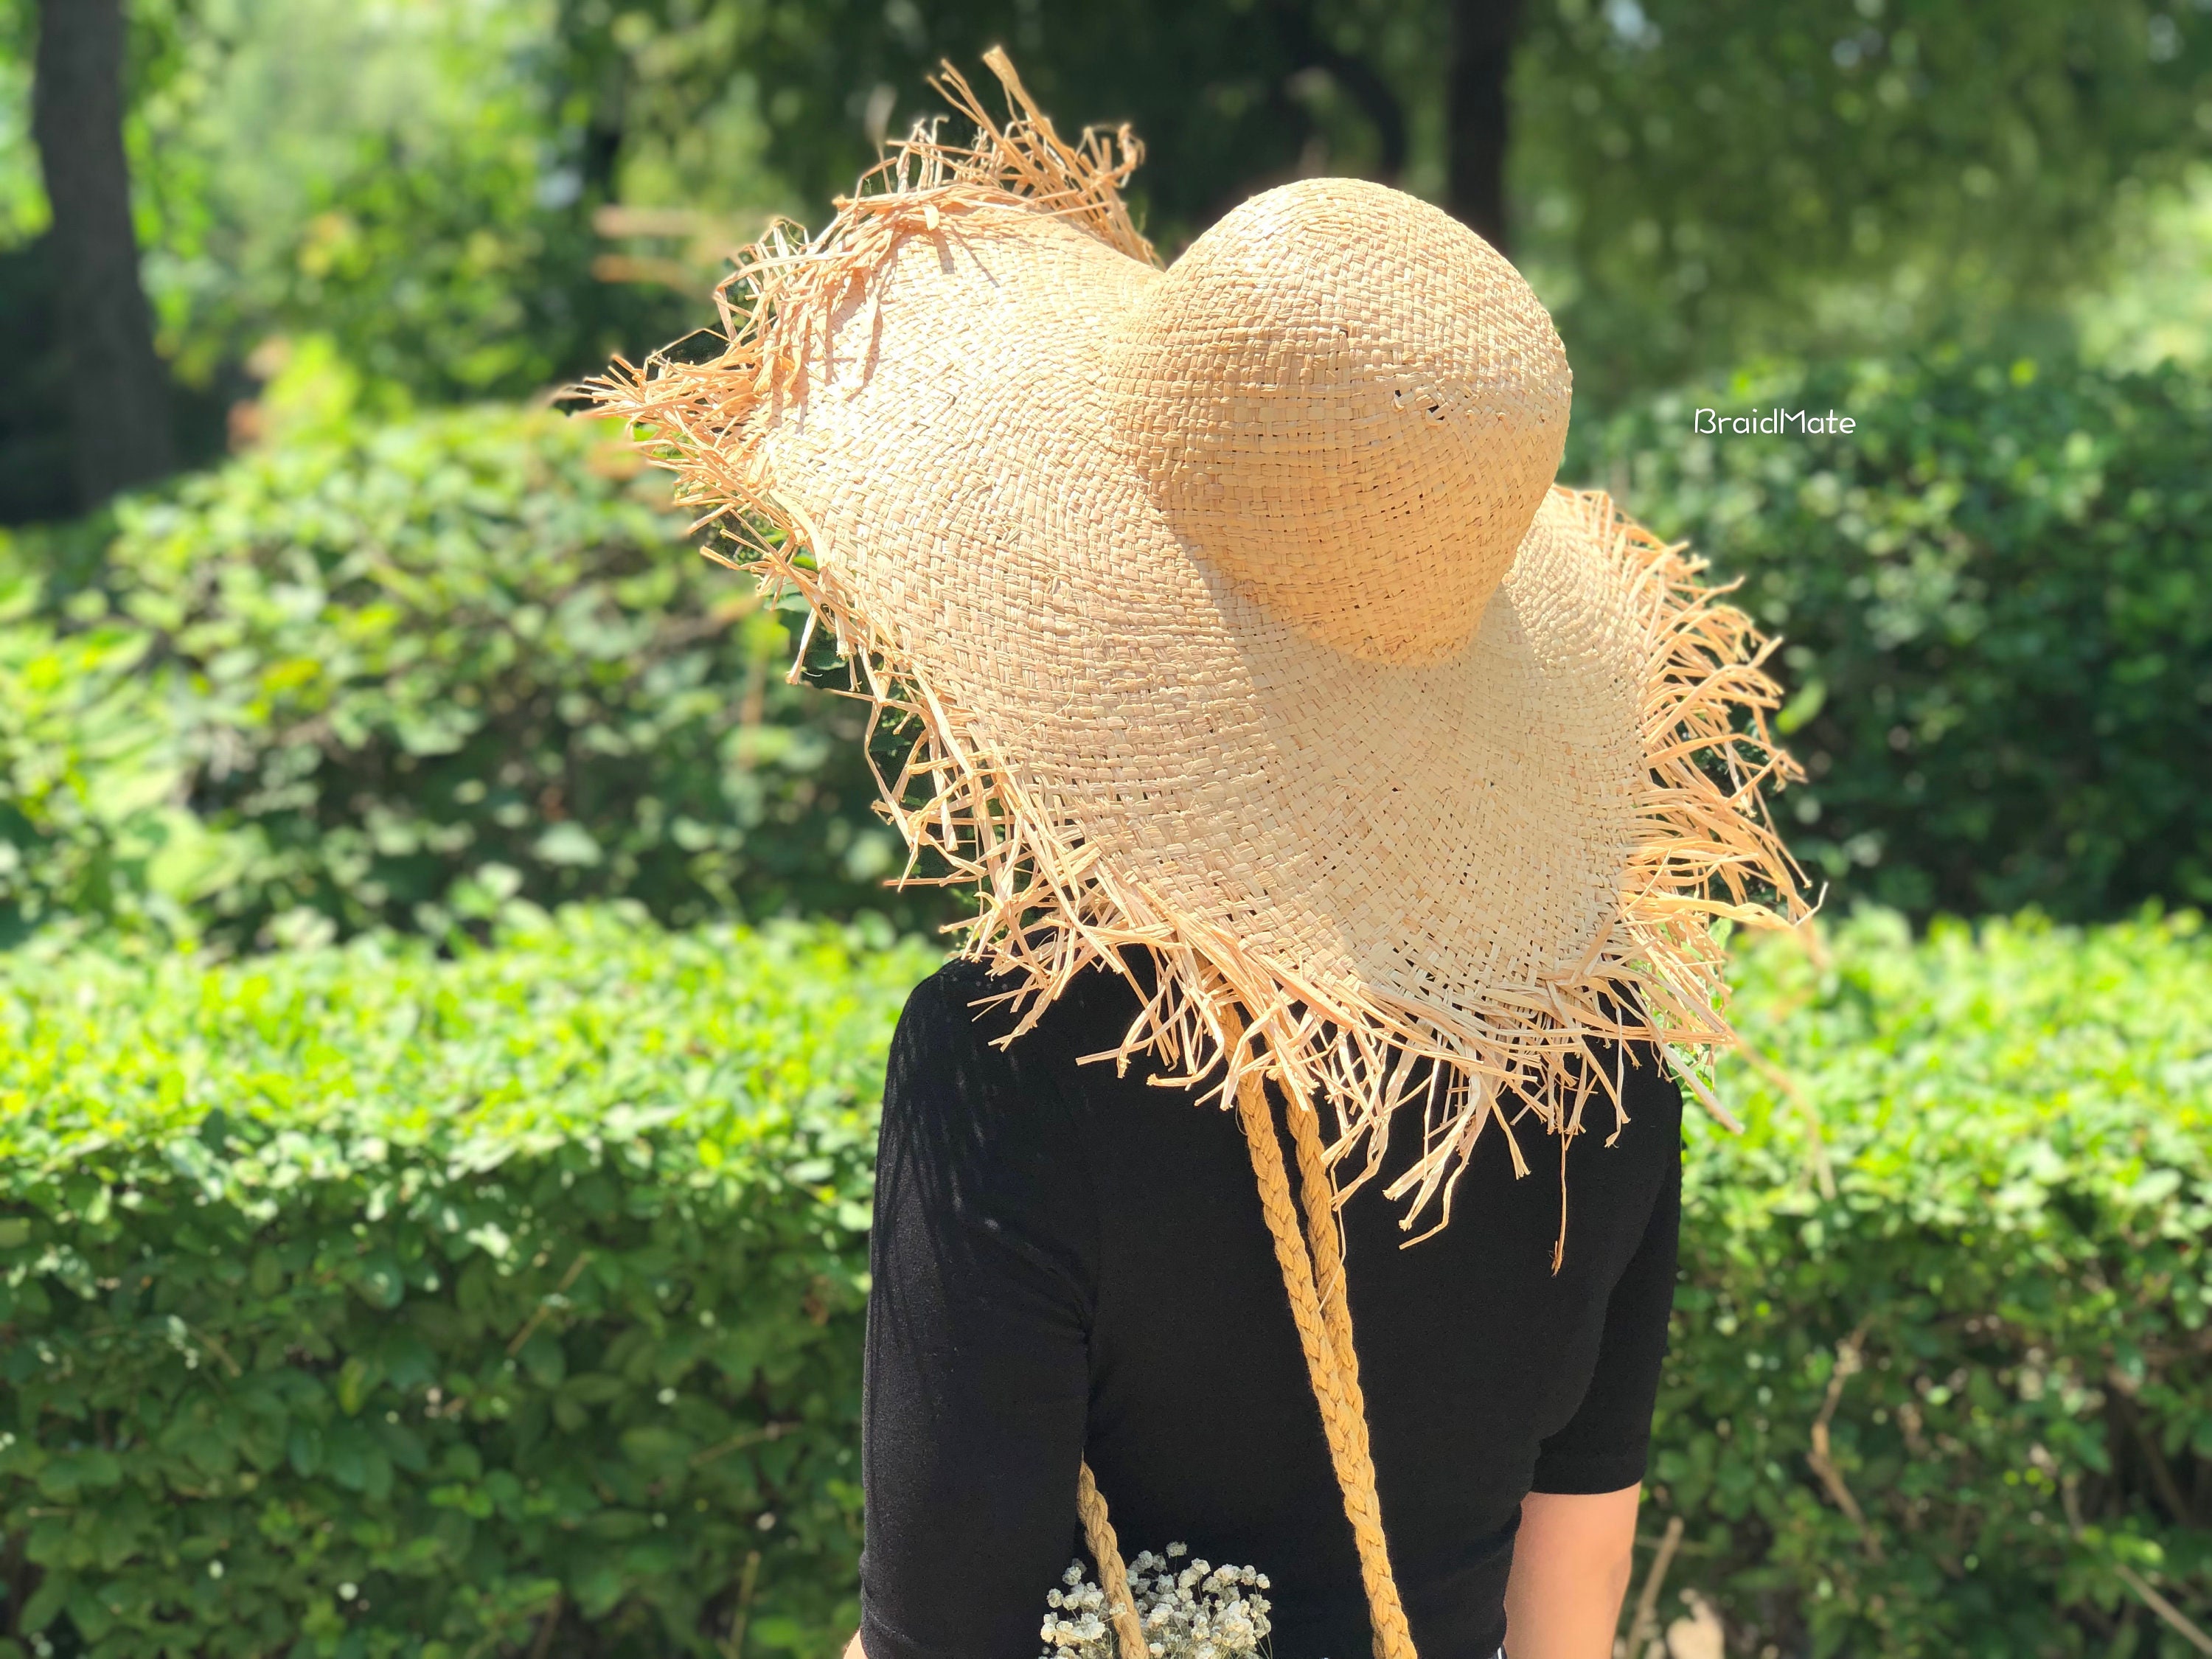 Chic Chic | Adjustable Large Straw Sun Hat | Large Frayed Straw Hat for Beach | Honeymoon Hat | Floppy Sun Hat | Gift for Her